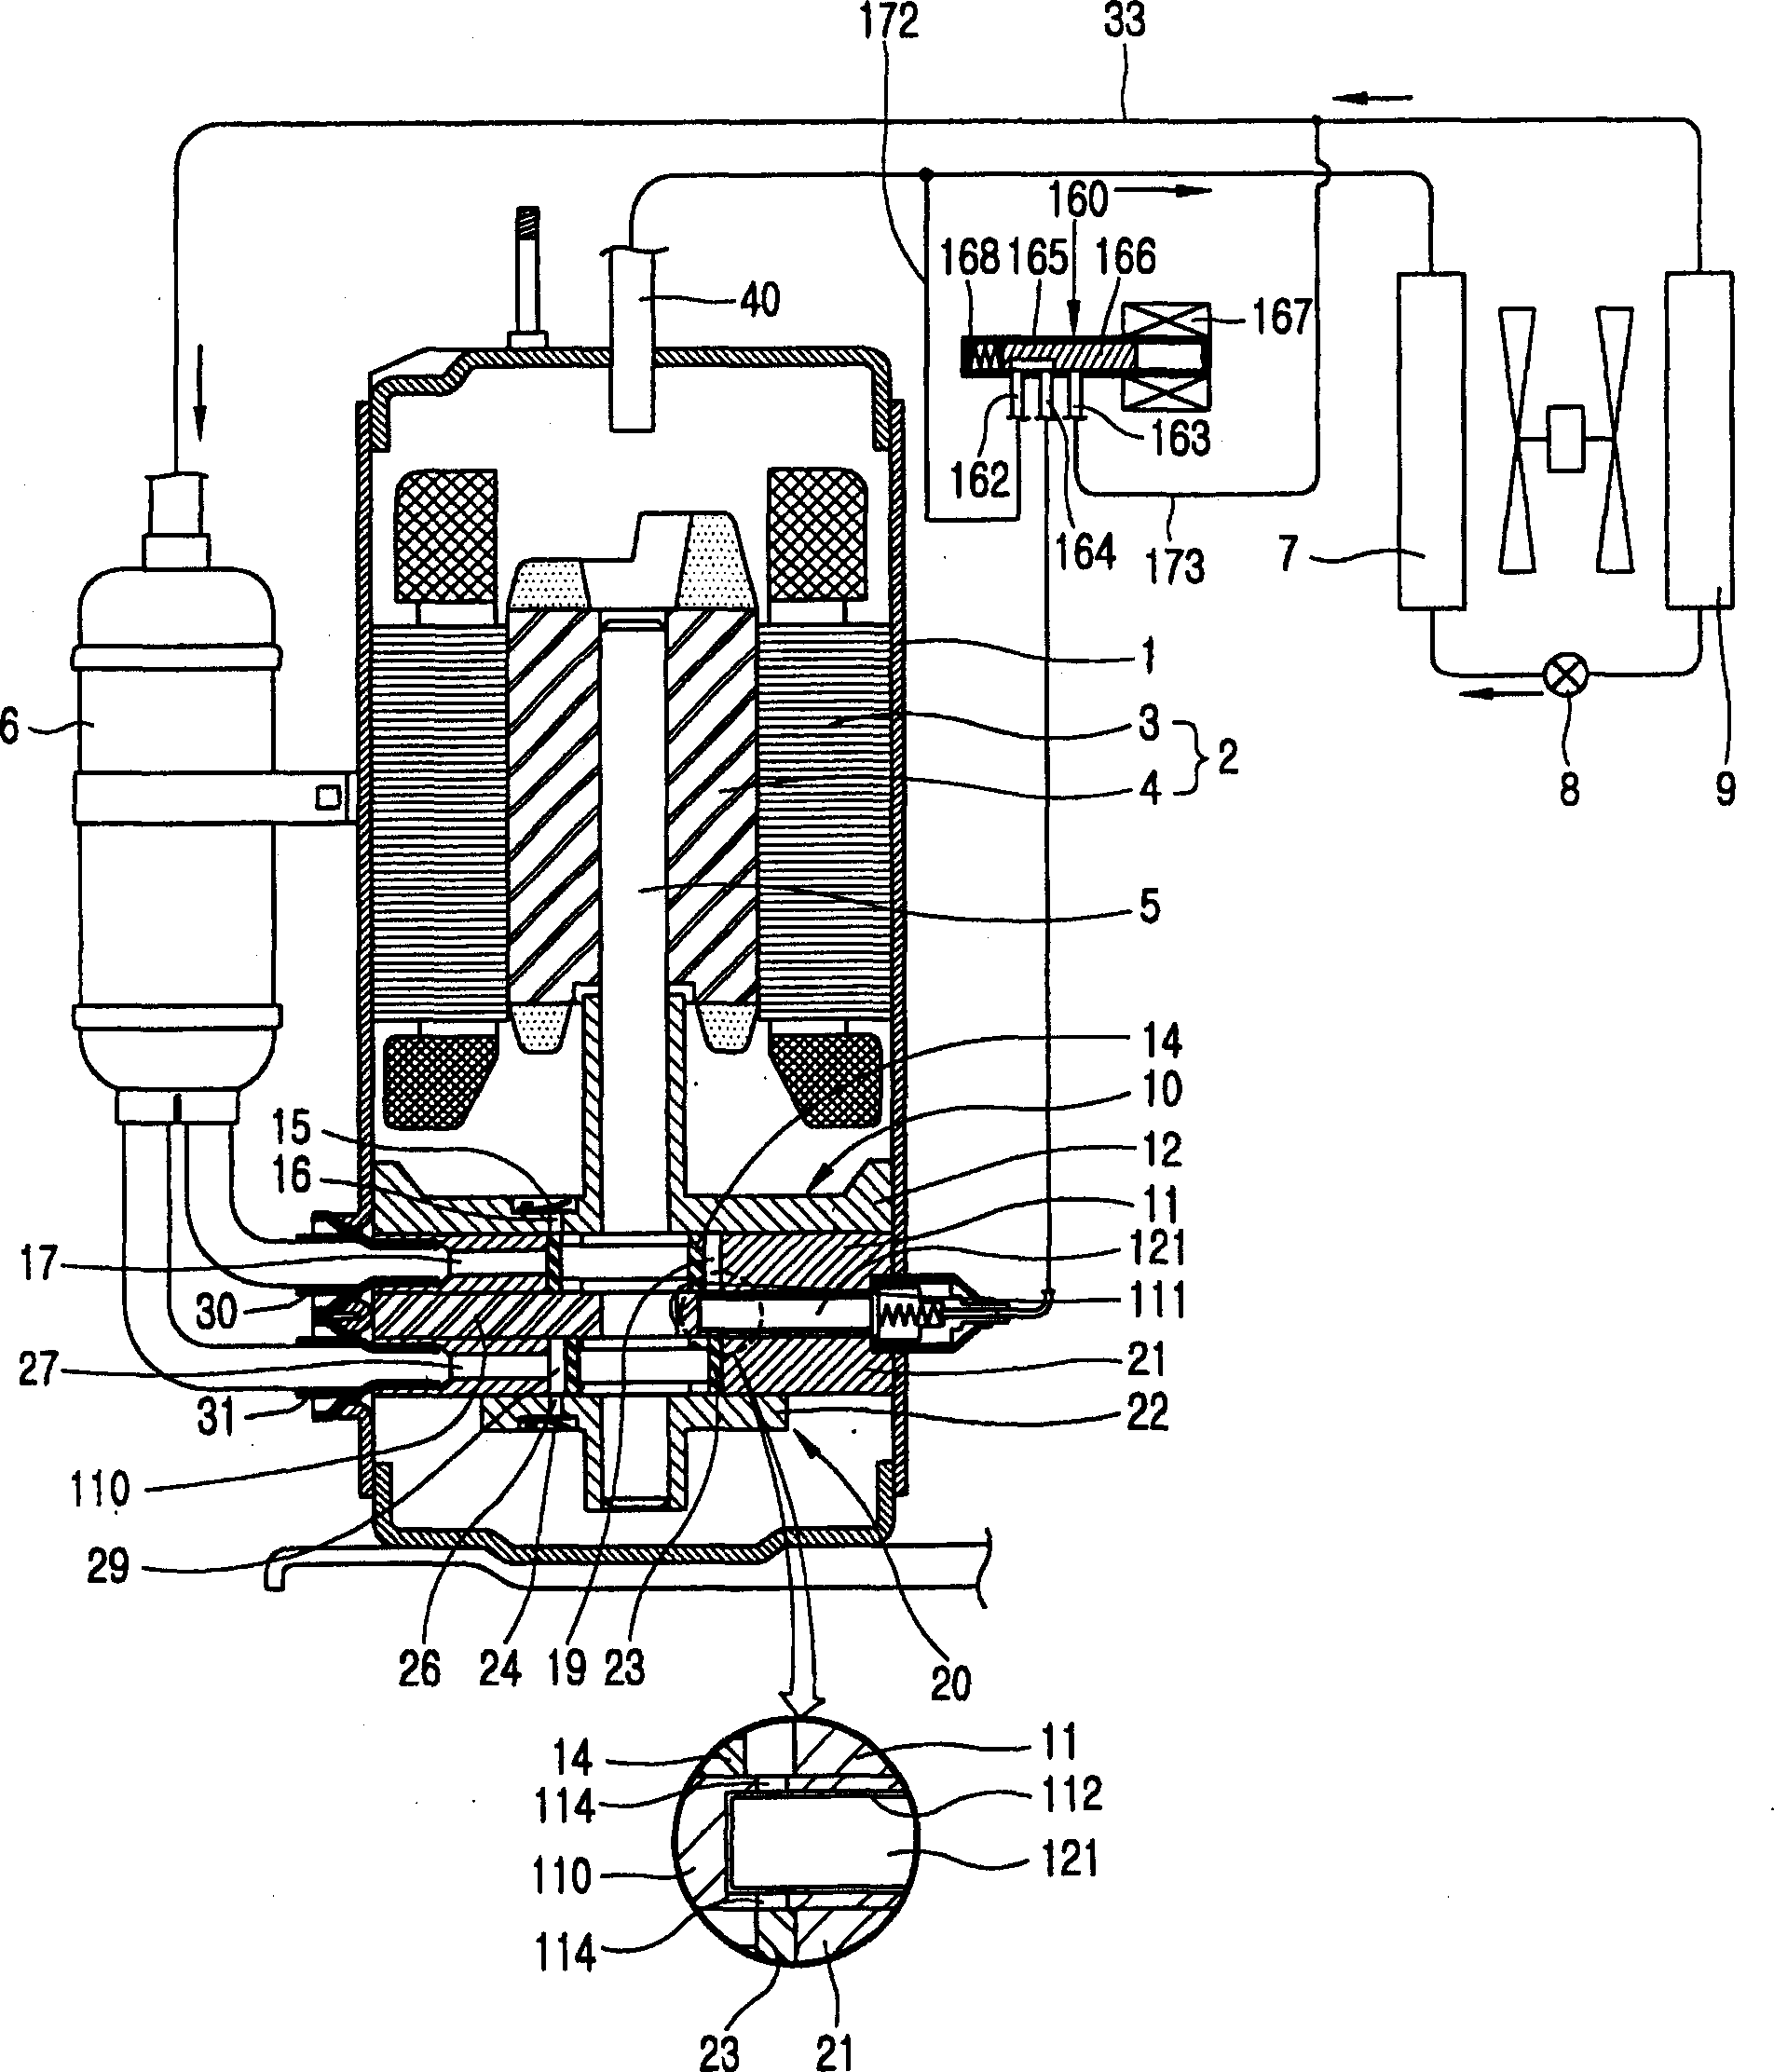 Apparatus for changing capacity of multi-stage rotary compressor